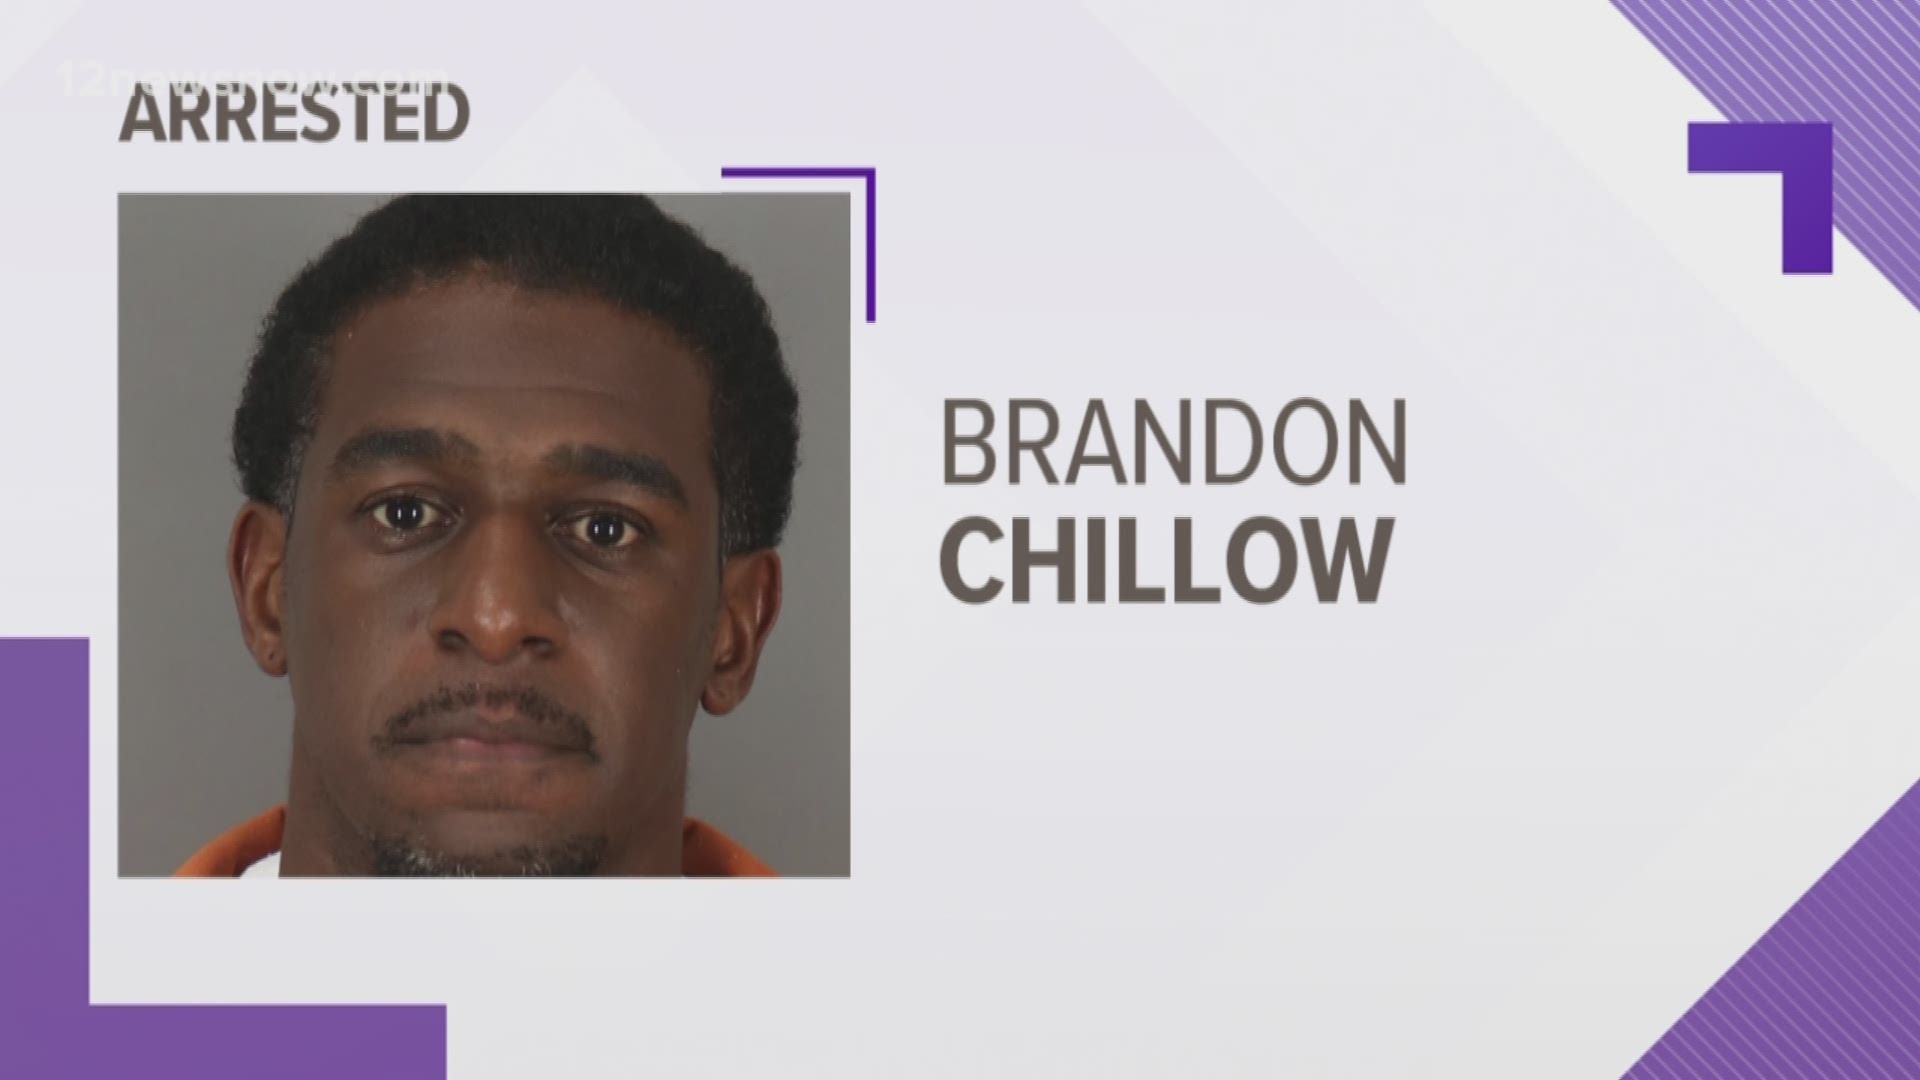 Brandon Louis Chillow, 35, a former substitute at Vincent Middle School, was arrested Monday on a charge of improper relationship between an educator and student